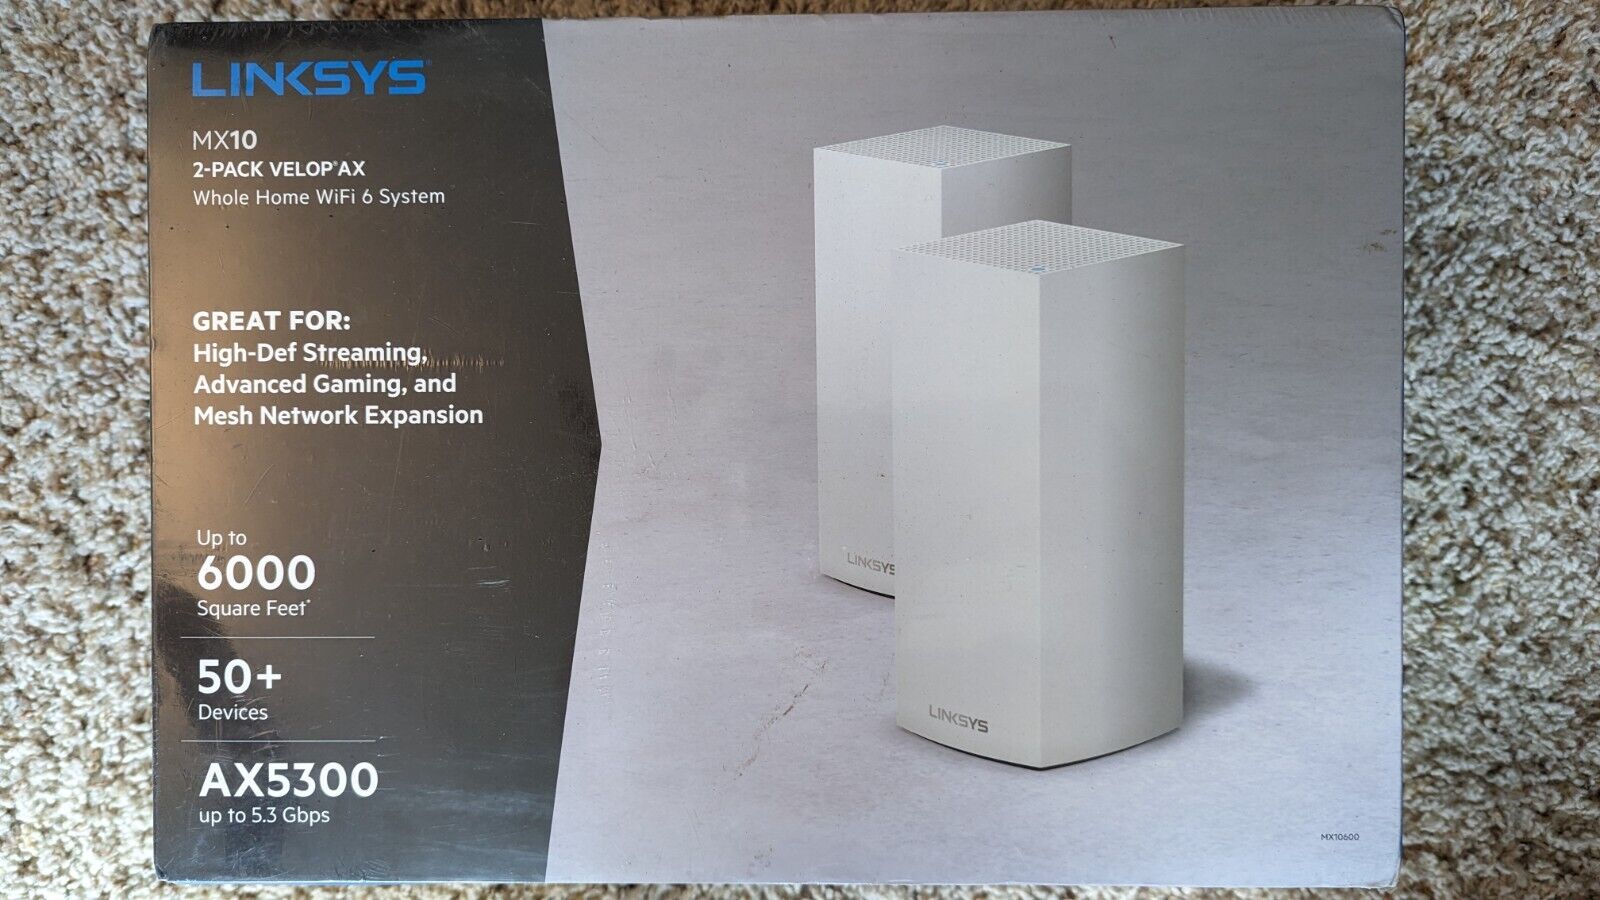 Linksys Velop AX5300 Whole Home Wi-Fi Mesh System, 2 pack (MX10600) WiFi 6 MX10